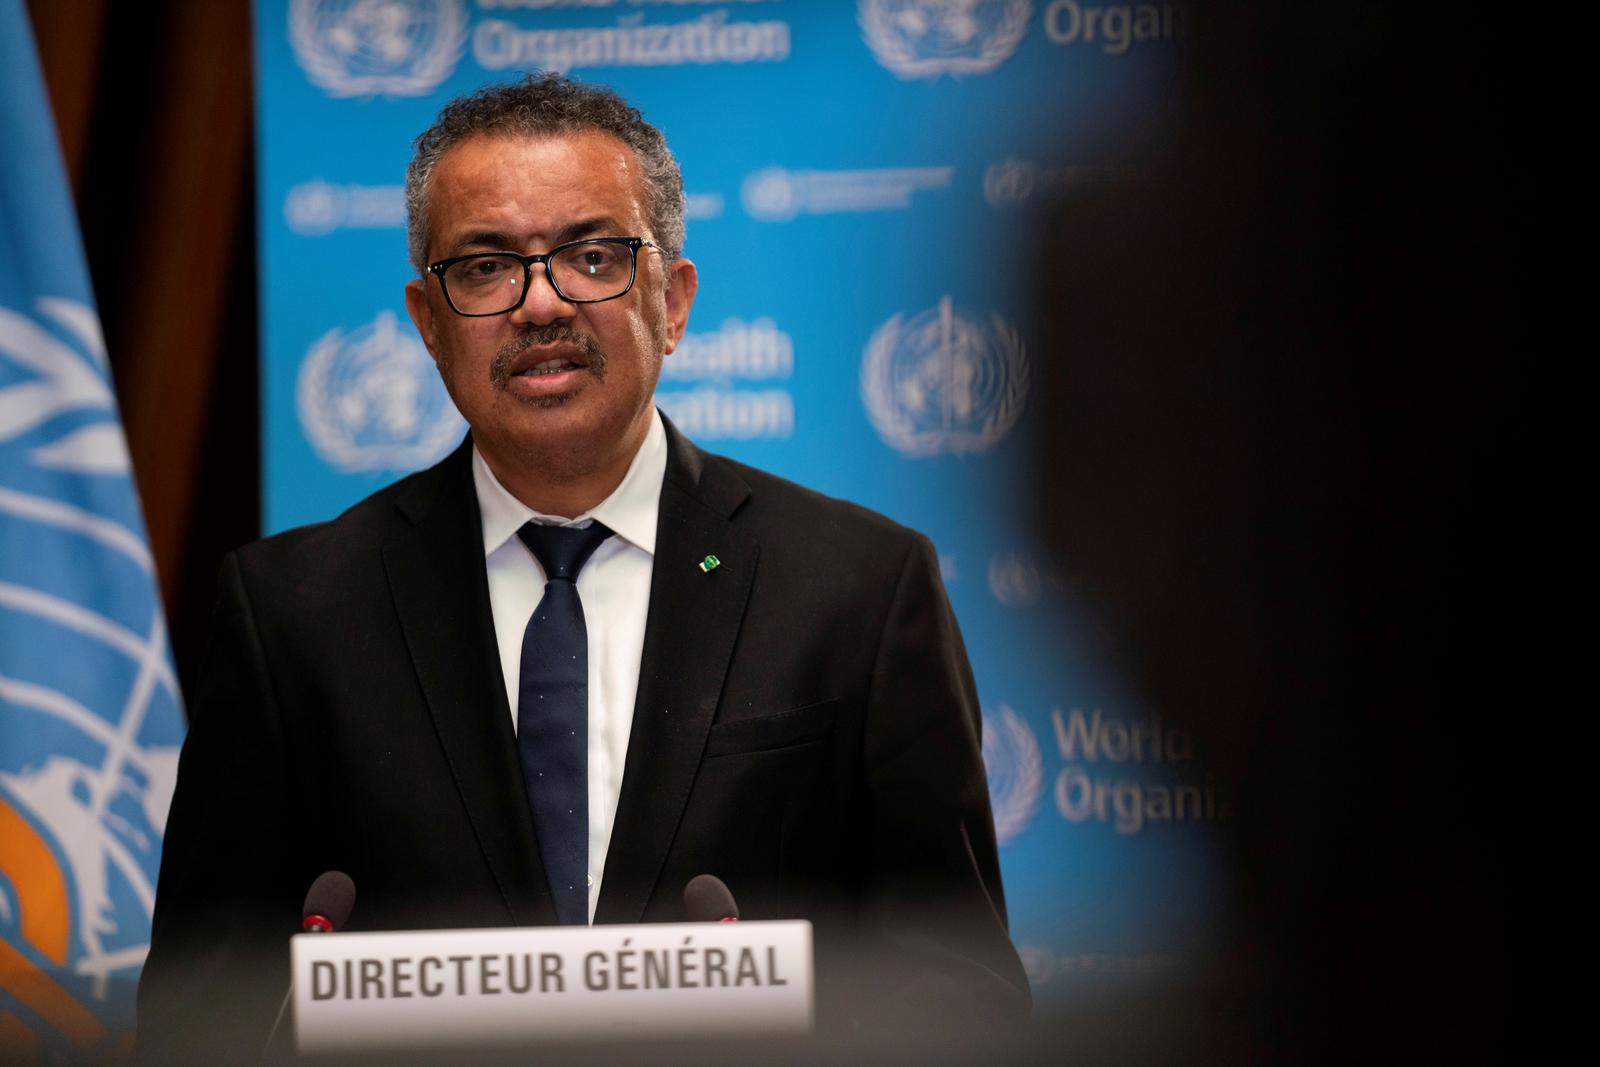 Data withheld from WHO team probing COVID-19 origins in China: Tedros